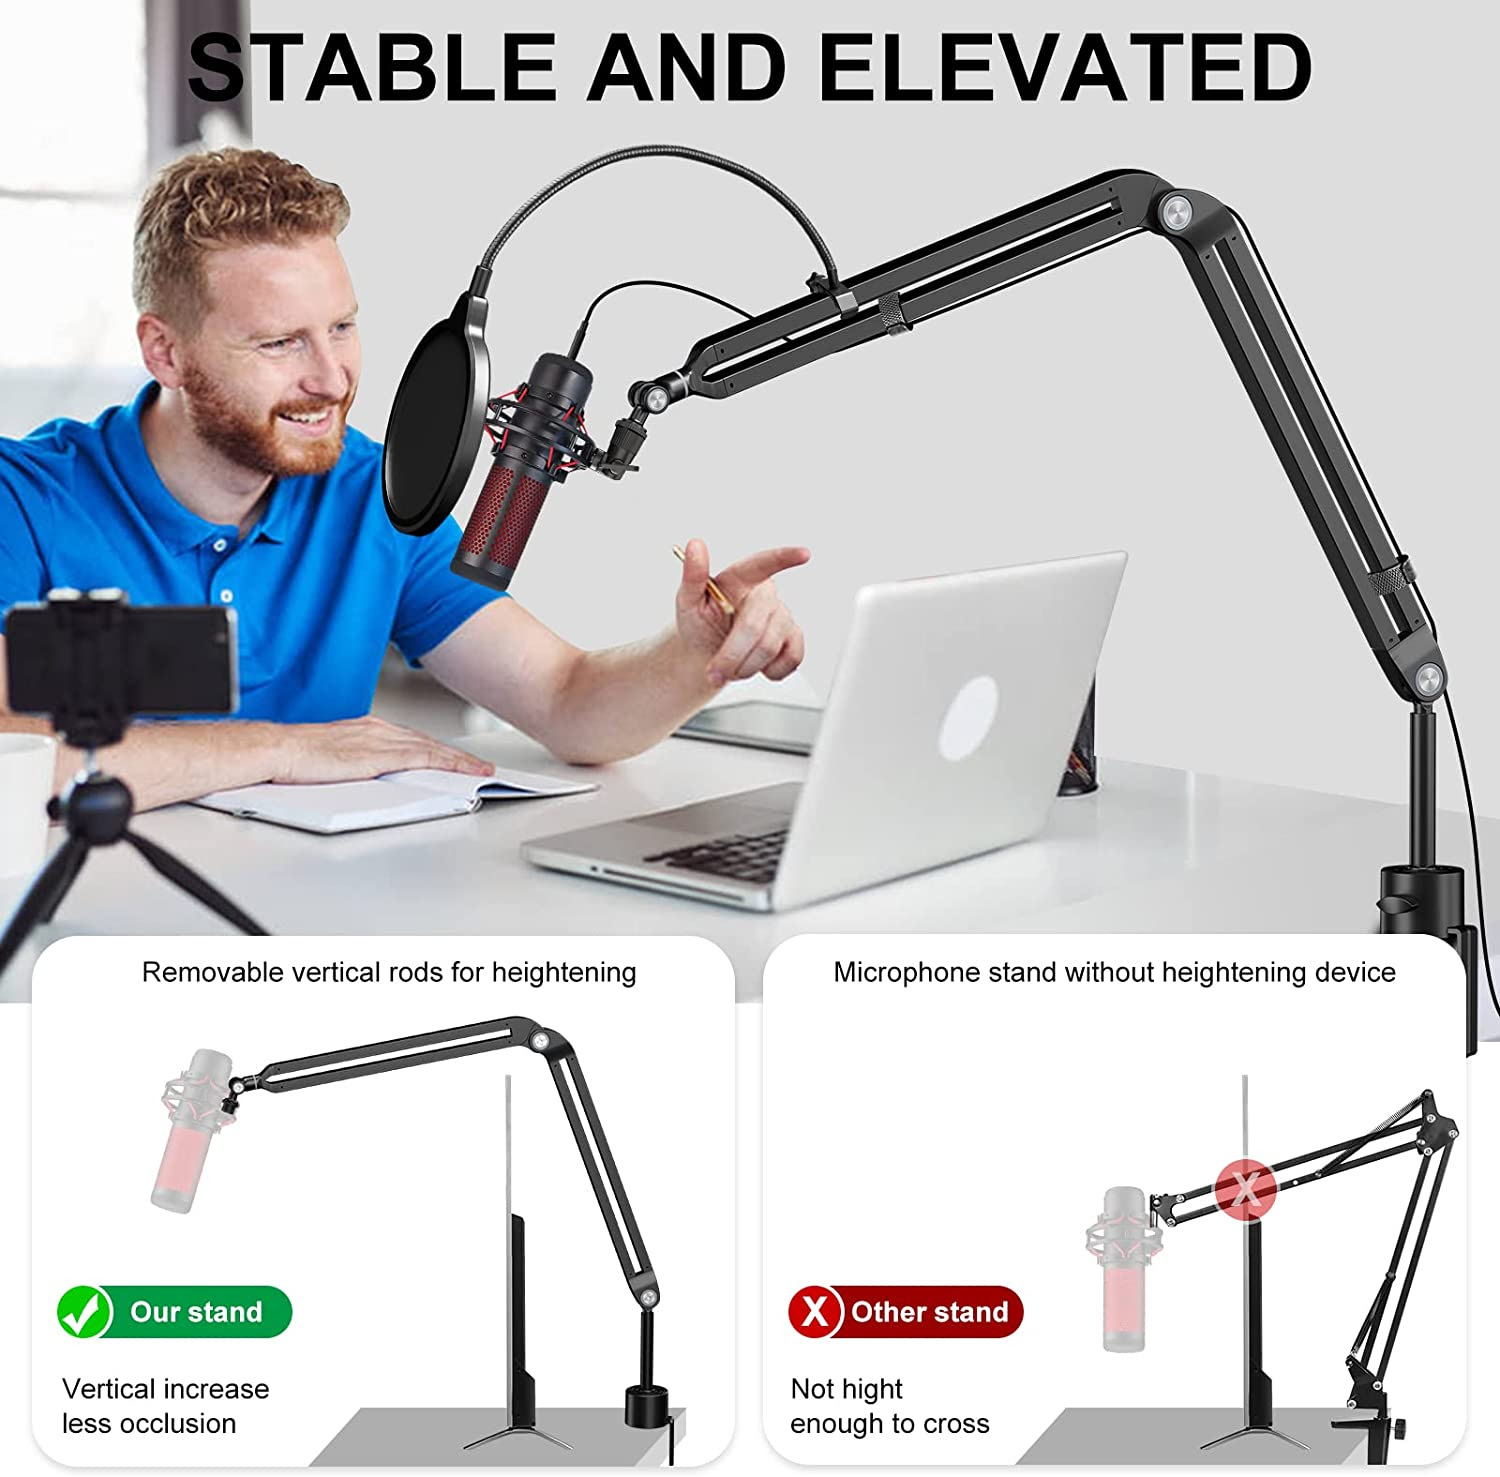 Aokeo Adjustable Compact Microphone Stand. 4490 units. EXW Los Angeles $9.95 unit.